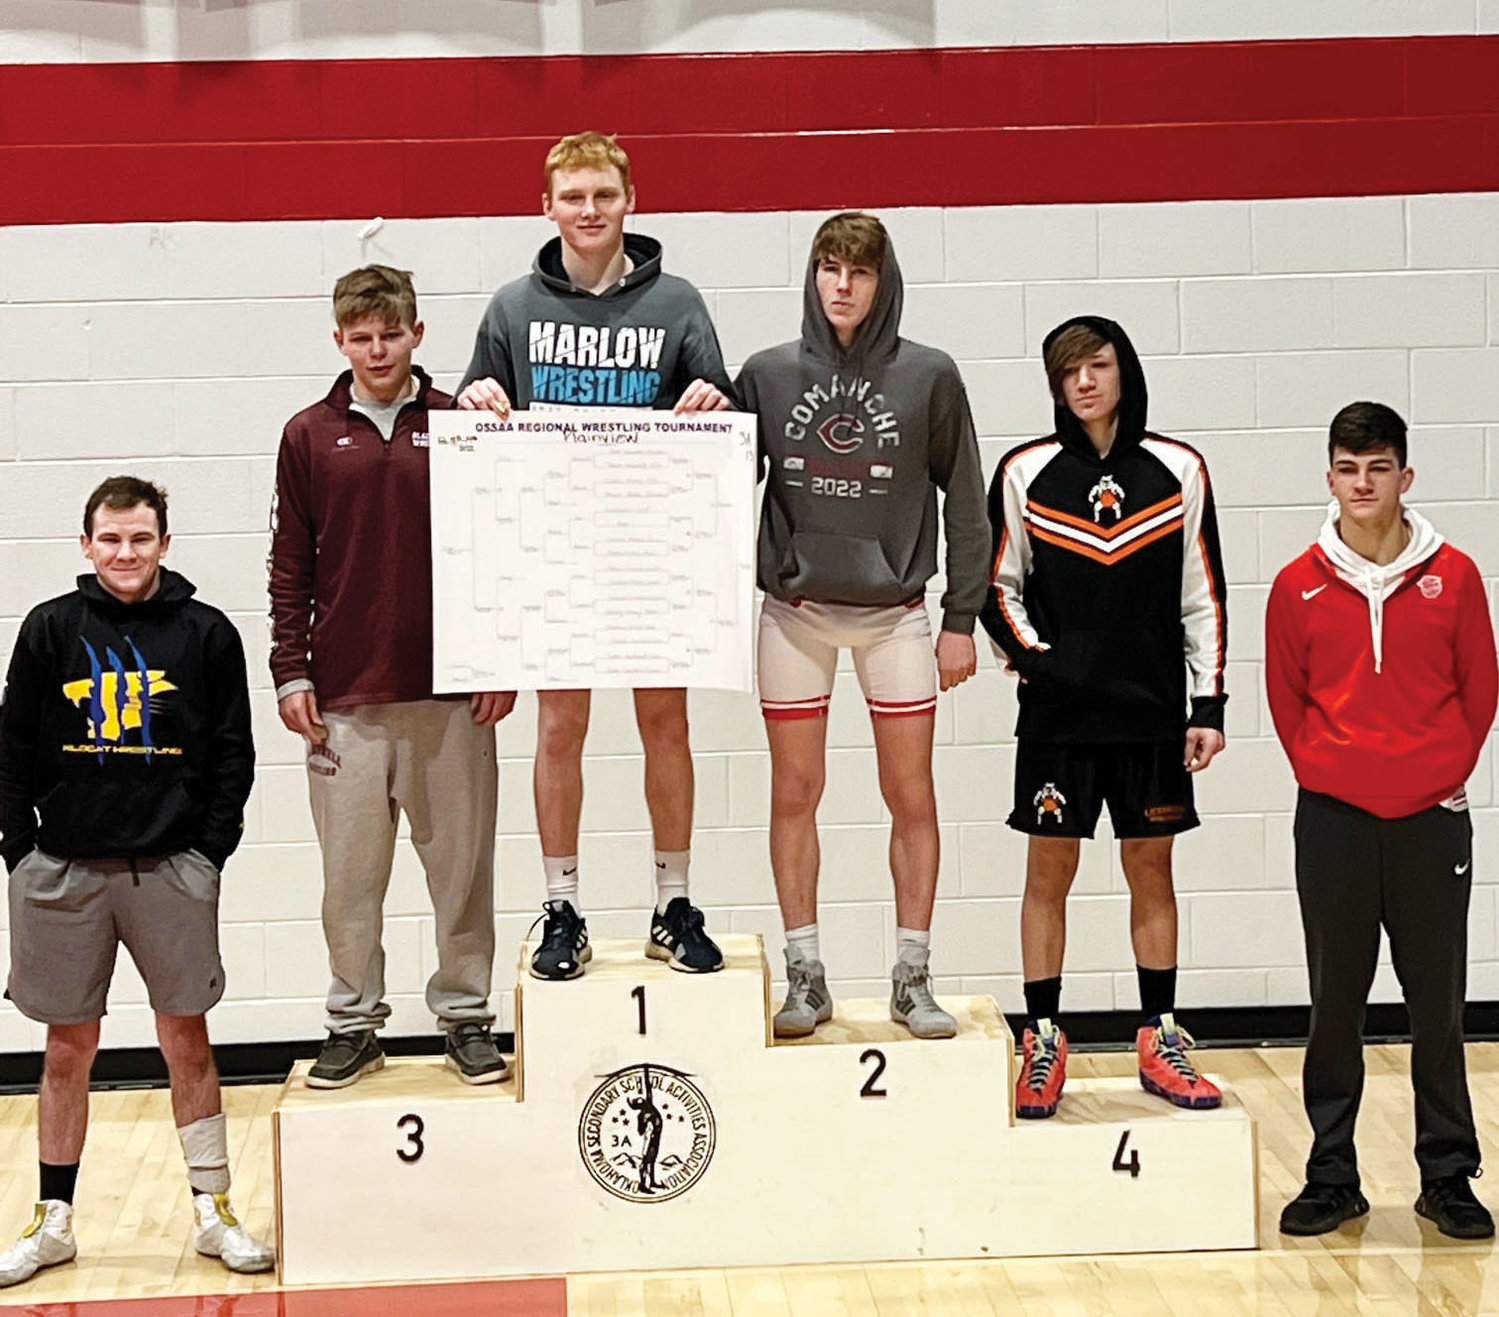 Tristan Buchanan finished fourth in the Regional Tournament and has qualified for State this weekend.